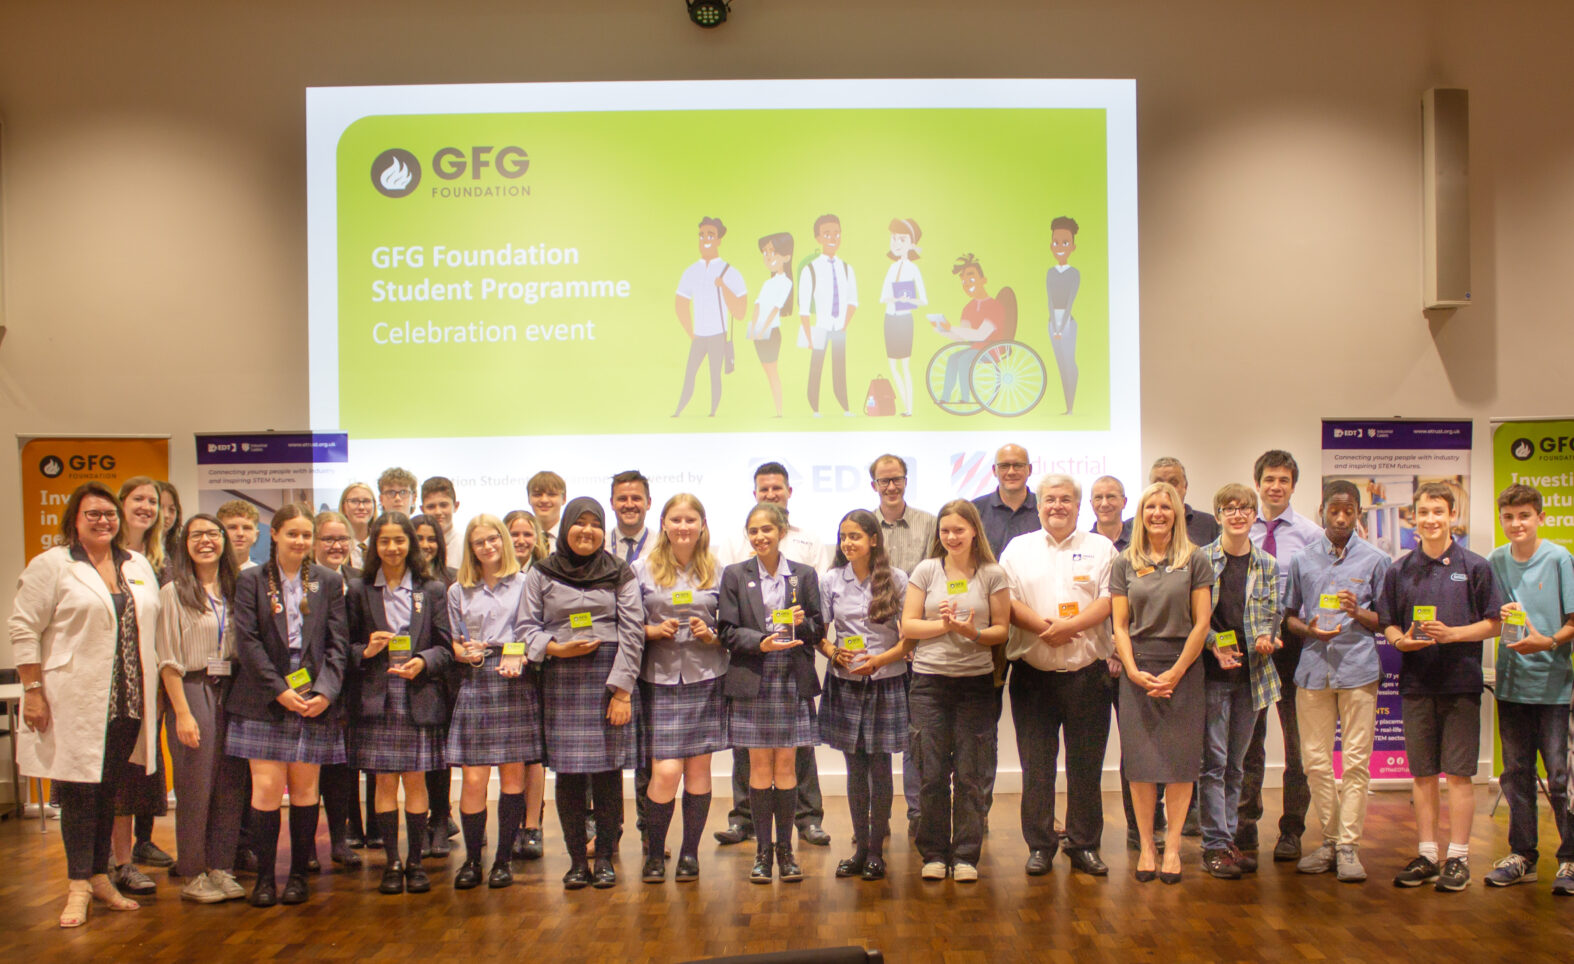 Celebrating Student Success: GFG Foundation’s Student Programme wraps up with Grand Final